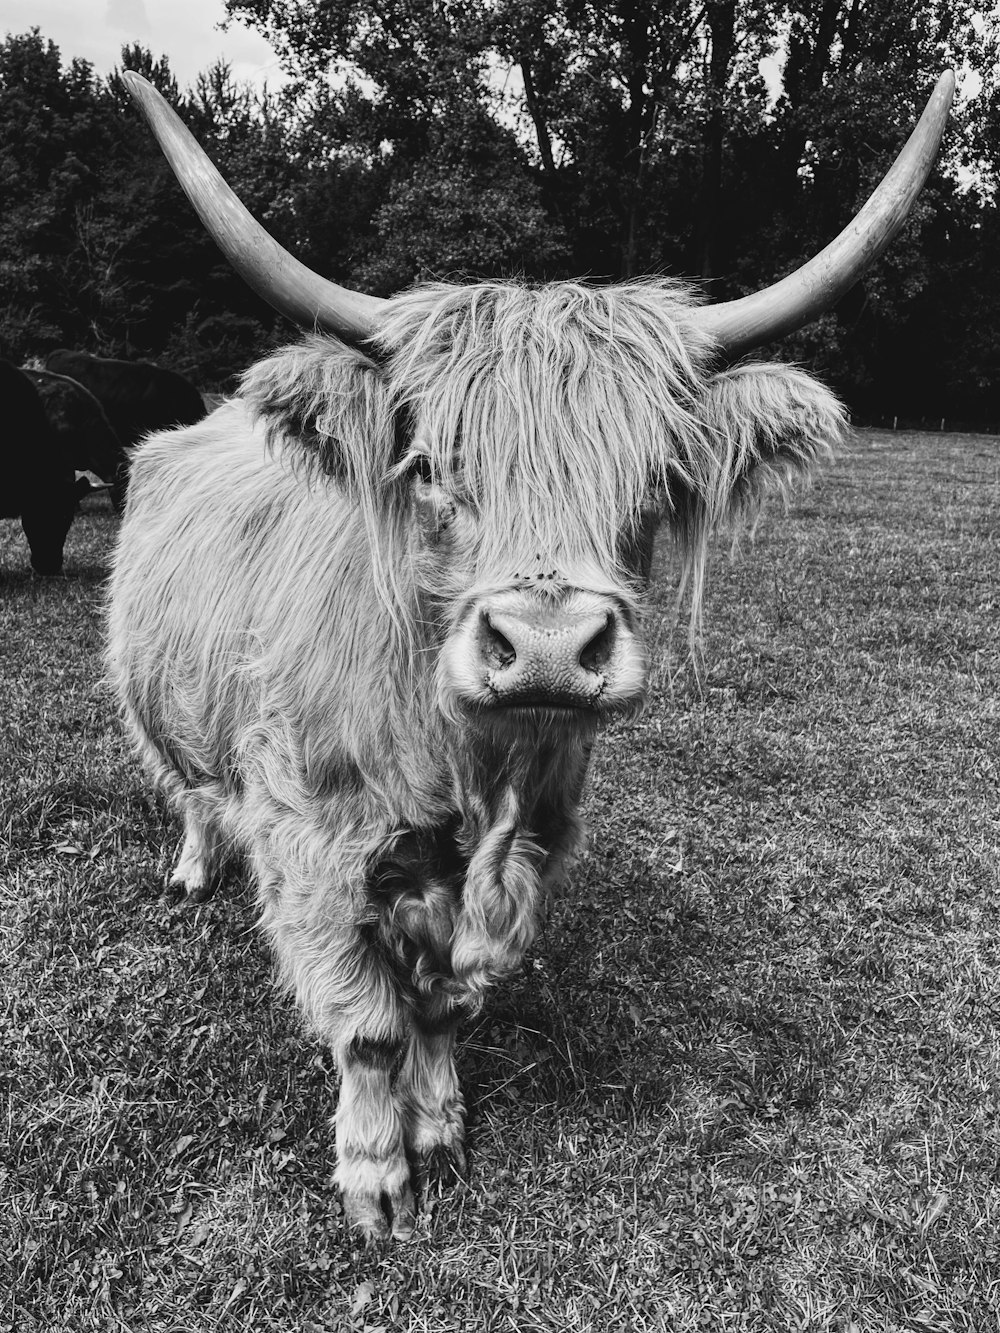 a yak with long horns